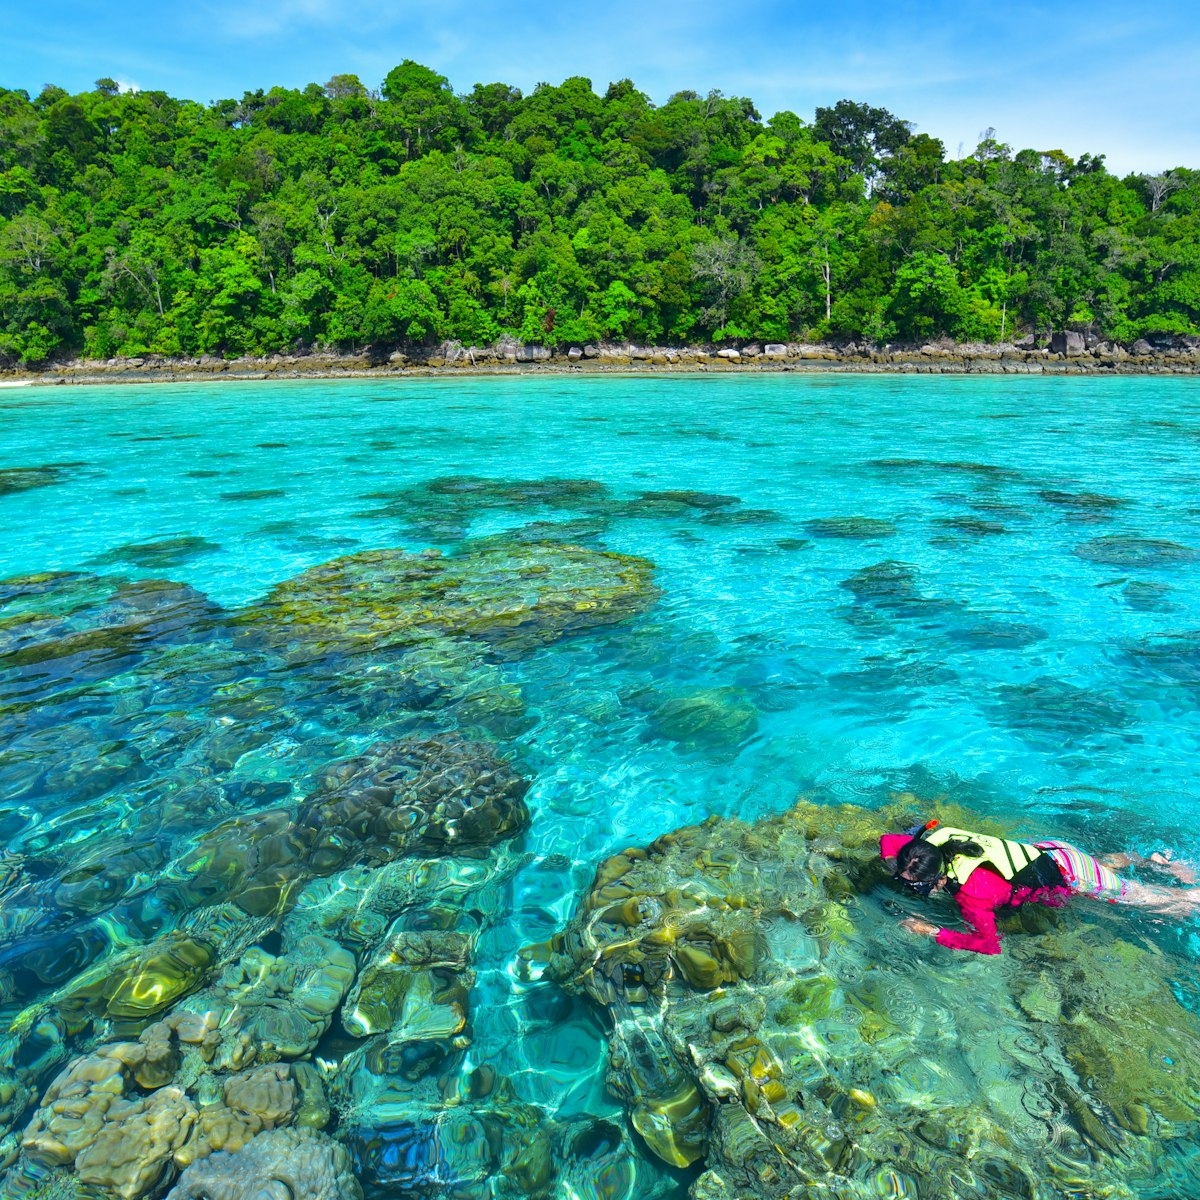 Snorkeling in clear water at Surin island.